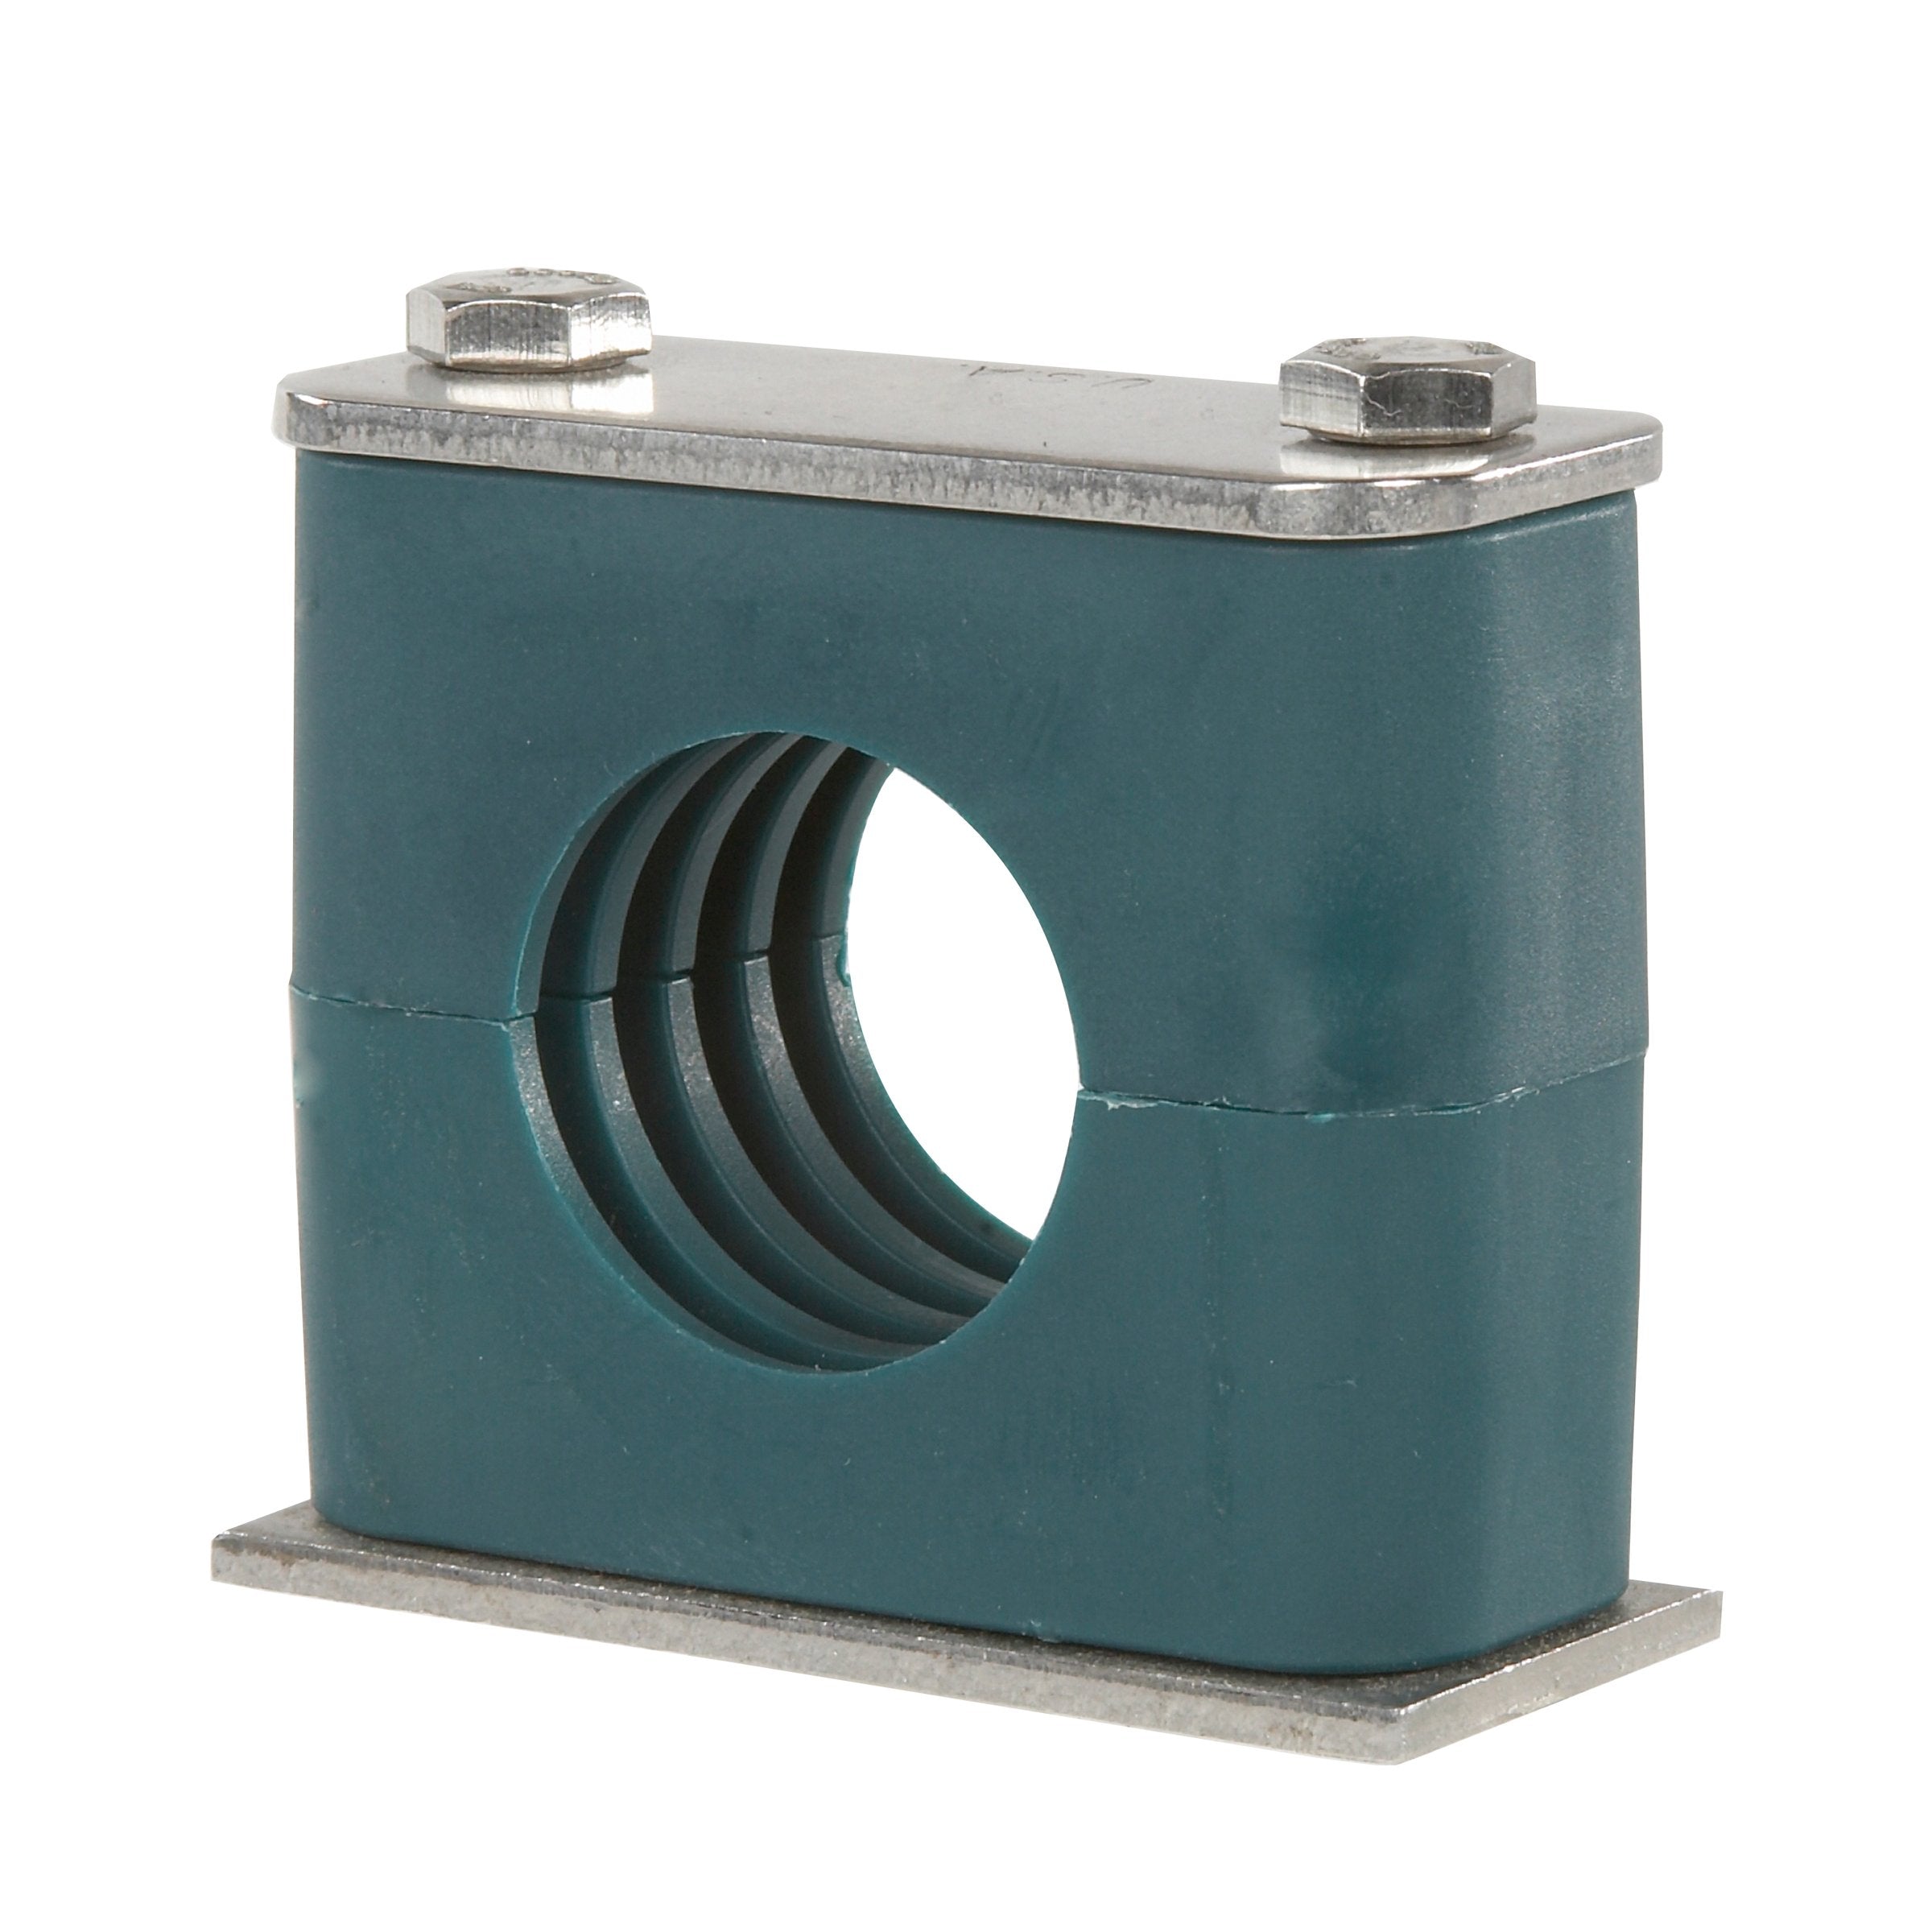 SP-216-PP-DP-AS-U-W5 : Stauff Clamp, Single Weld Plate, 0.625 inch (16mm) OD, for 5/8" Tube, Green PP Insert, Profiled Interior, 316SS